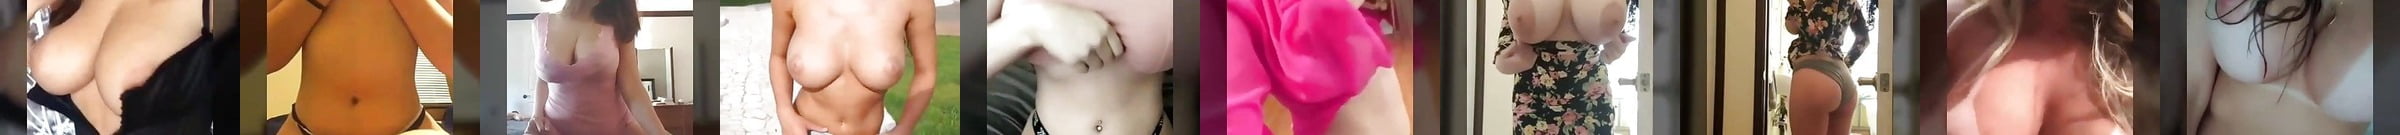 Featured Tit Drop Compilation Porn Videos Xhamster